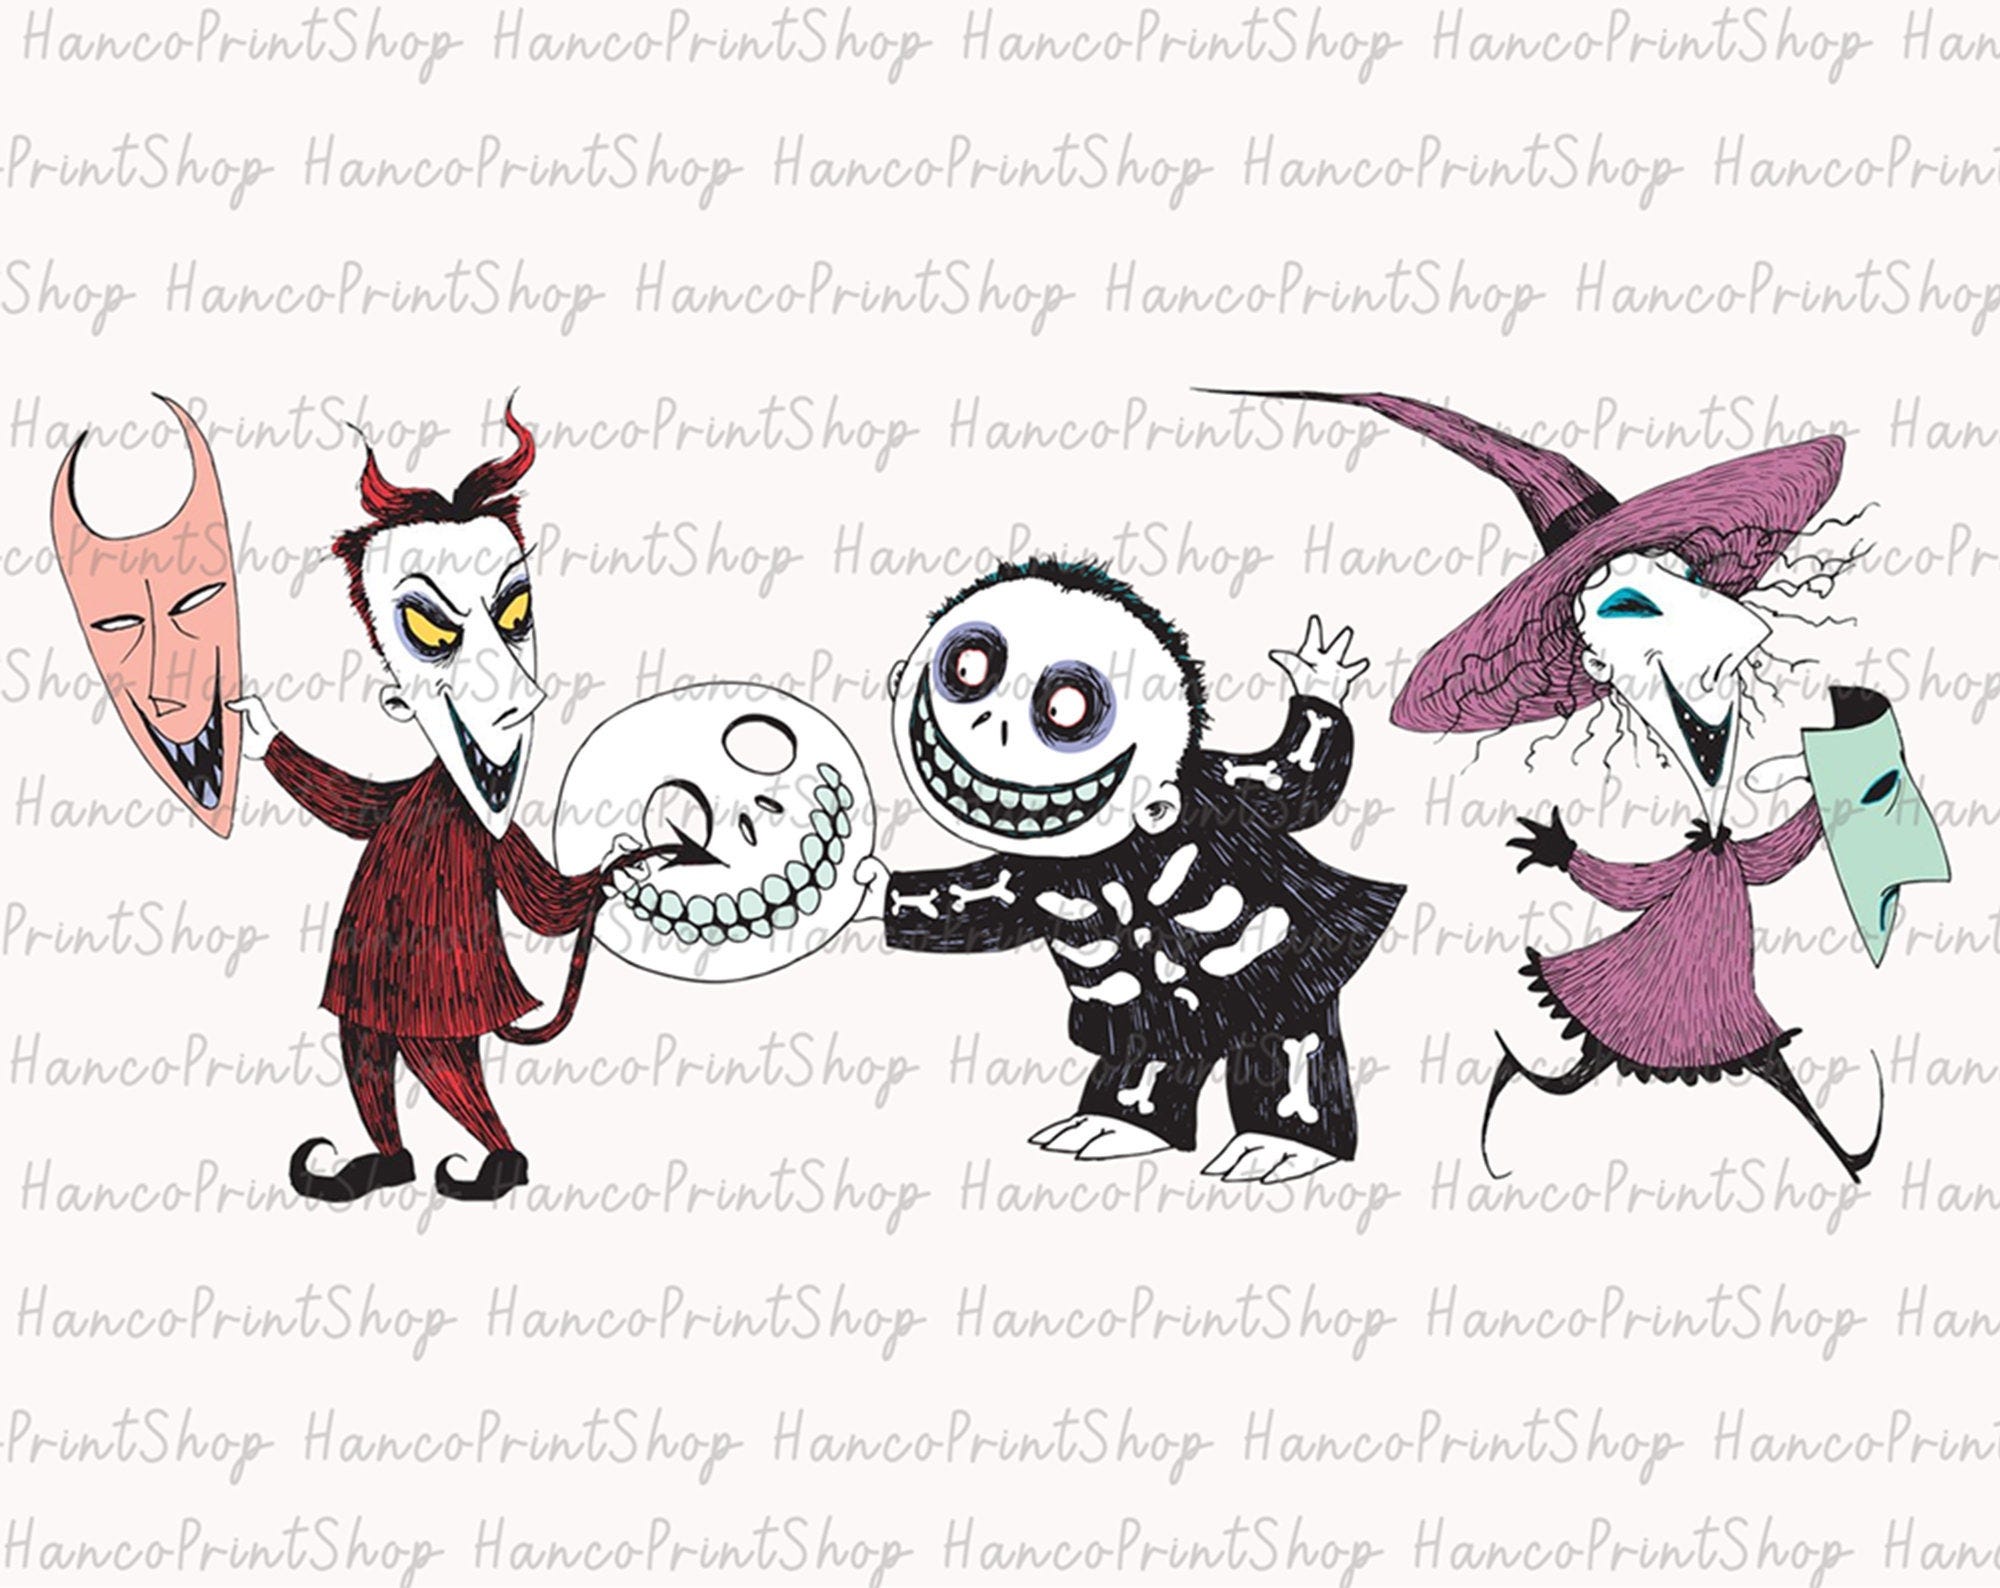 Nightmare Before Png, Halloween Costume Png, Halloween Pumpkin Png, Trick Or Treat Png, Boo Png, Halloween Shirt Png, Spooky Vibes Png